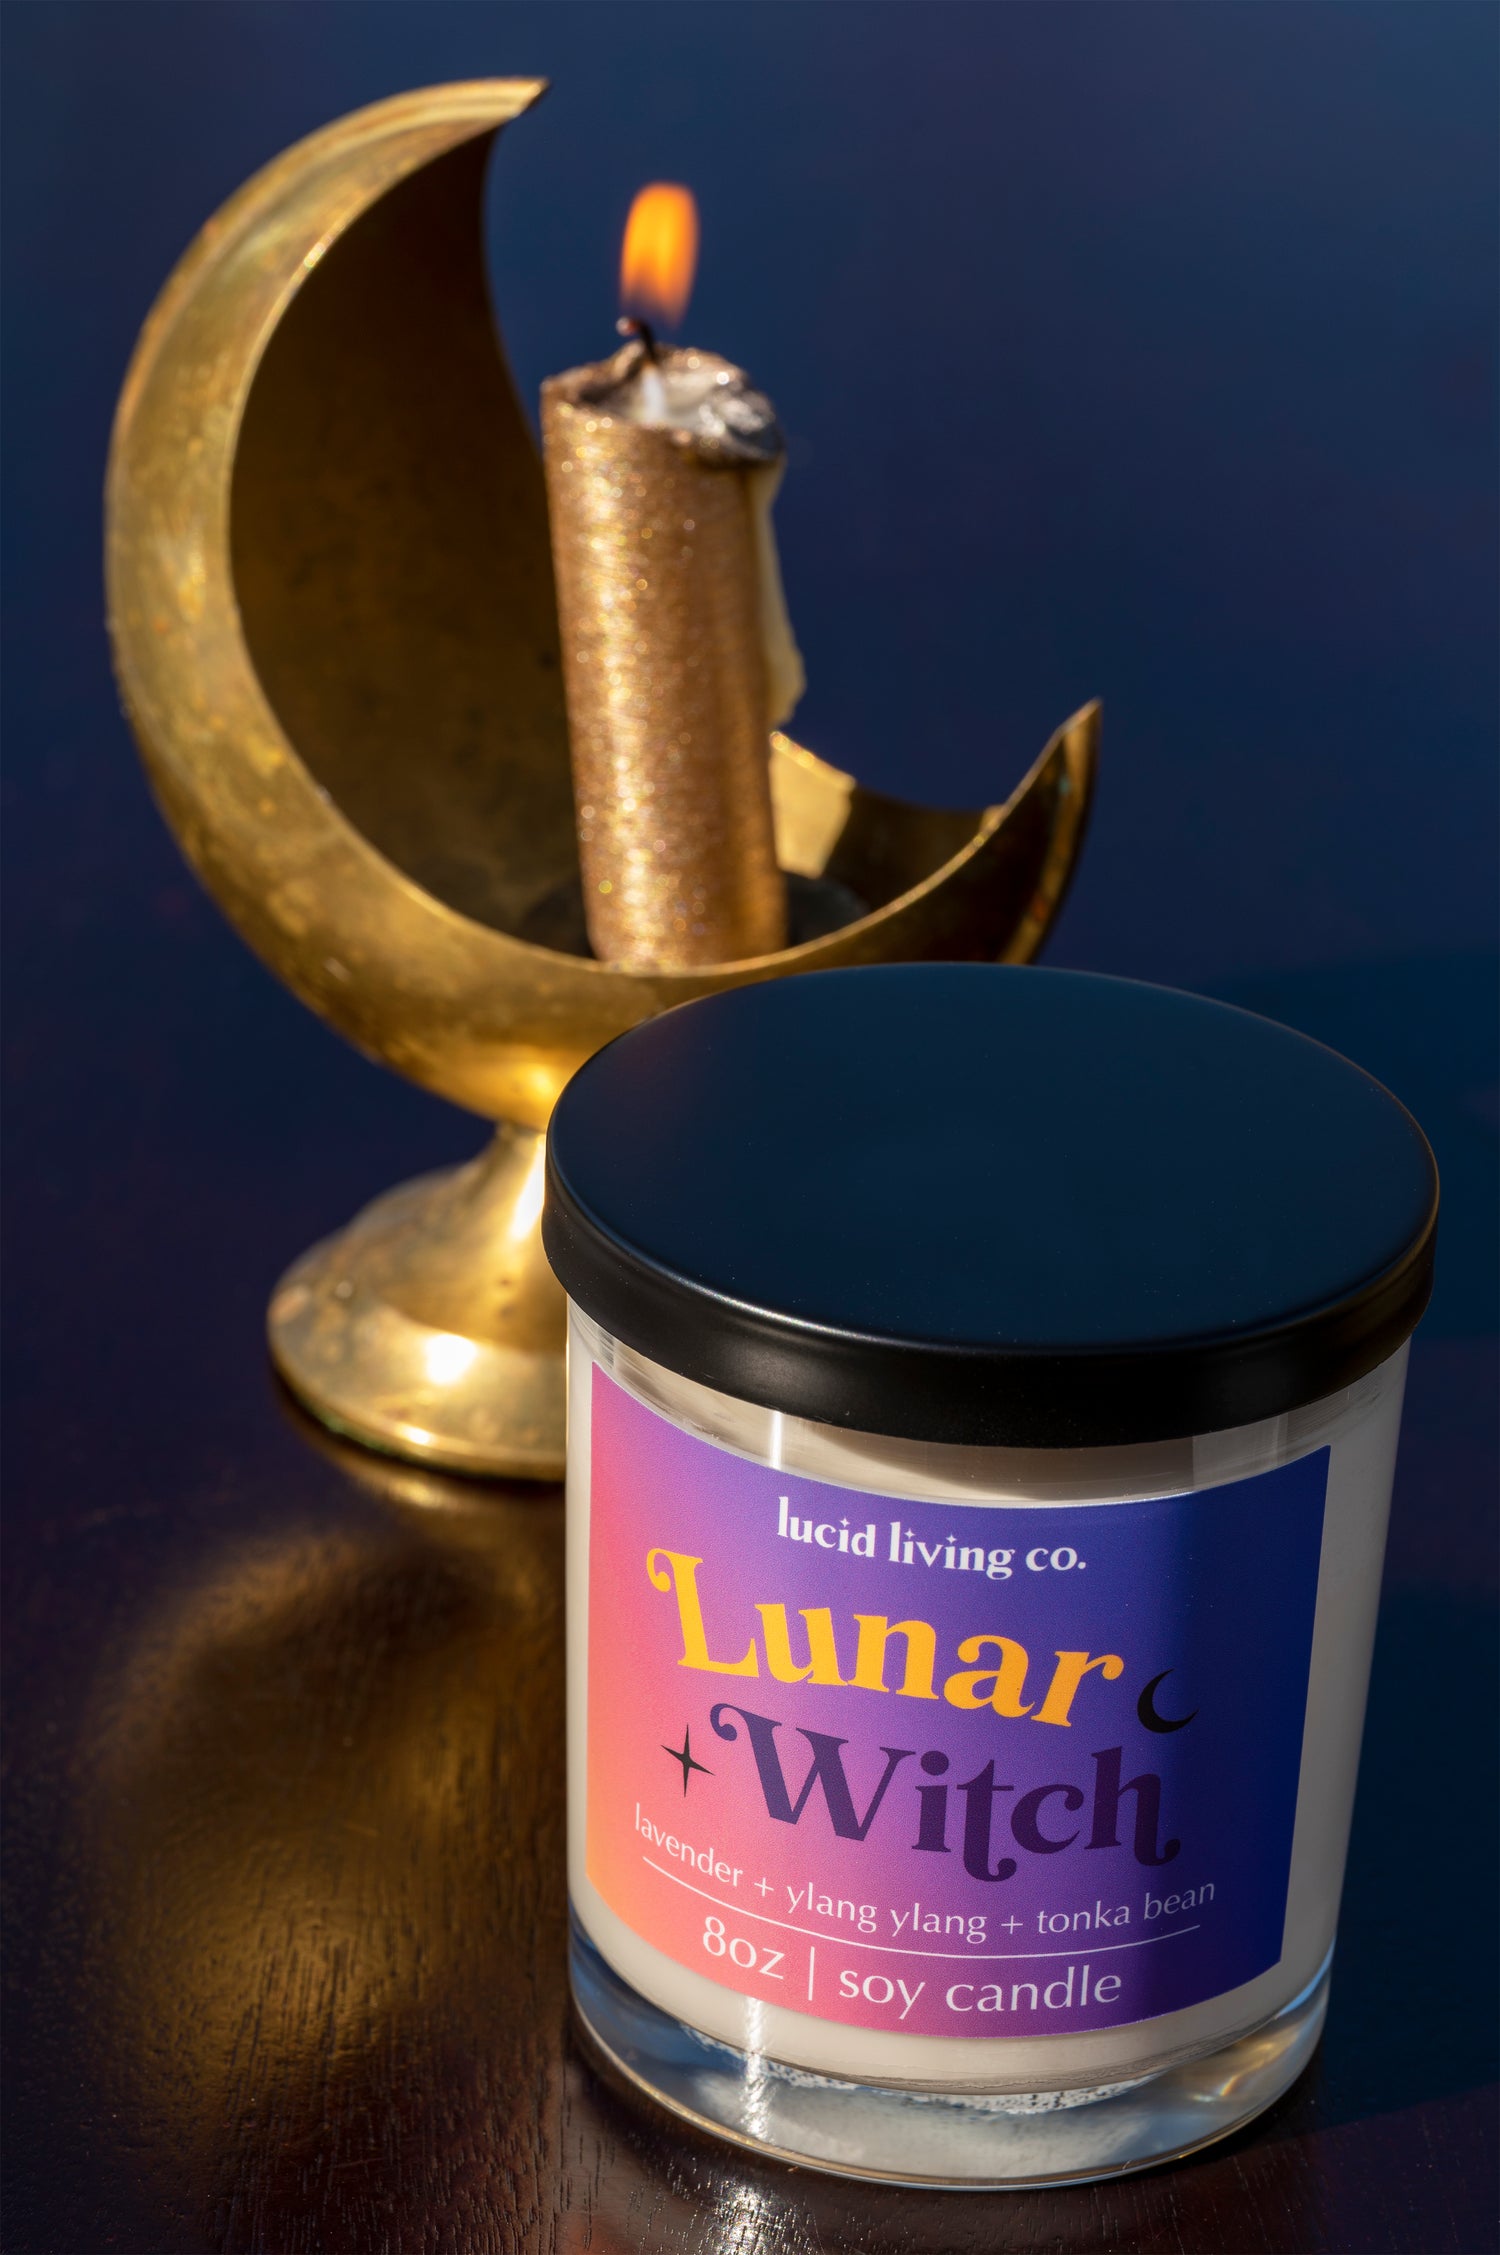 Lunar Witch Soy Candle